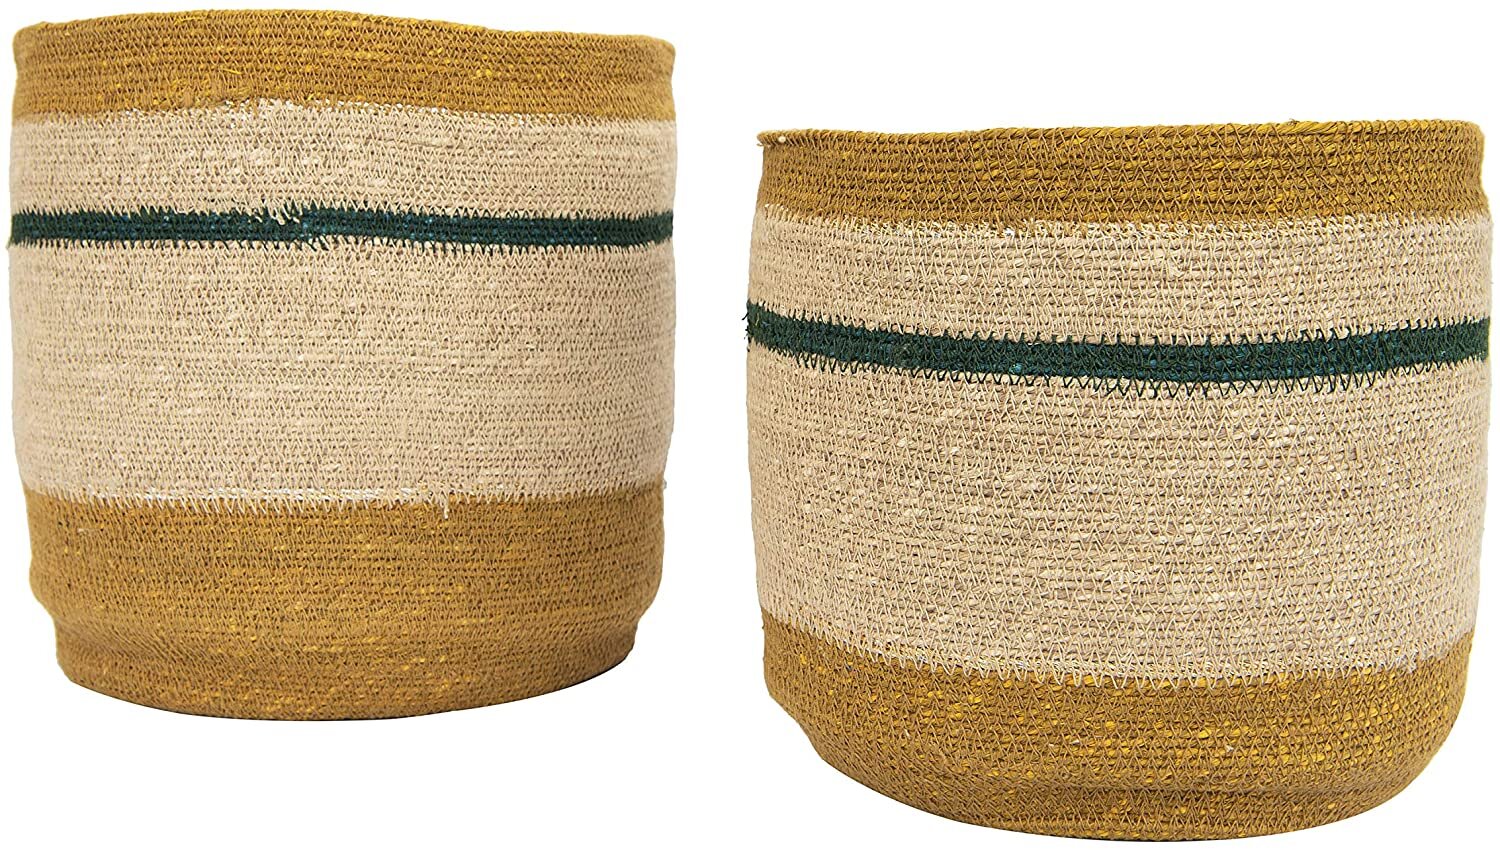 Creative Co-op natural seagrass striped baskets